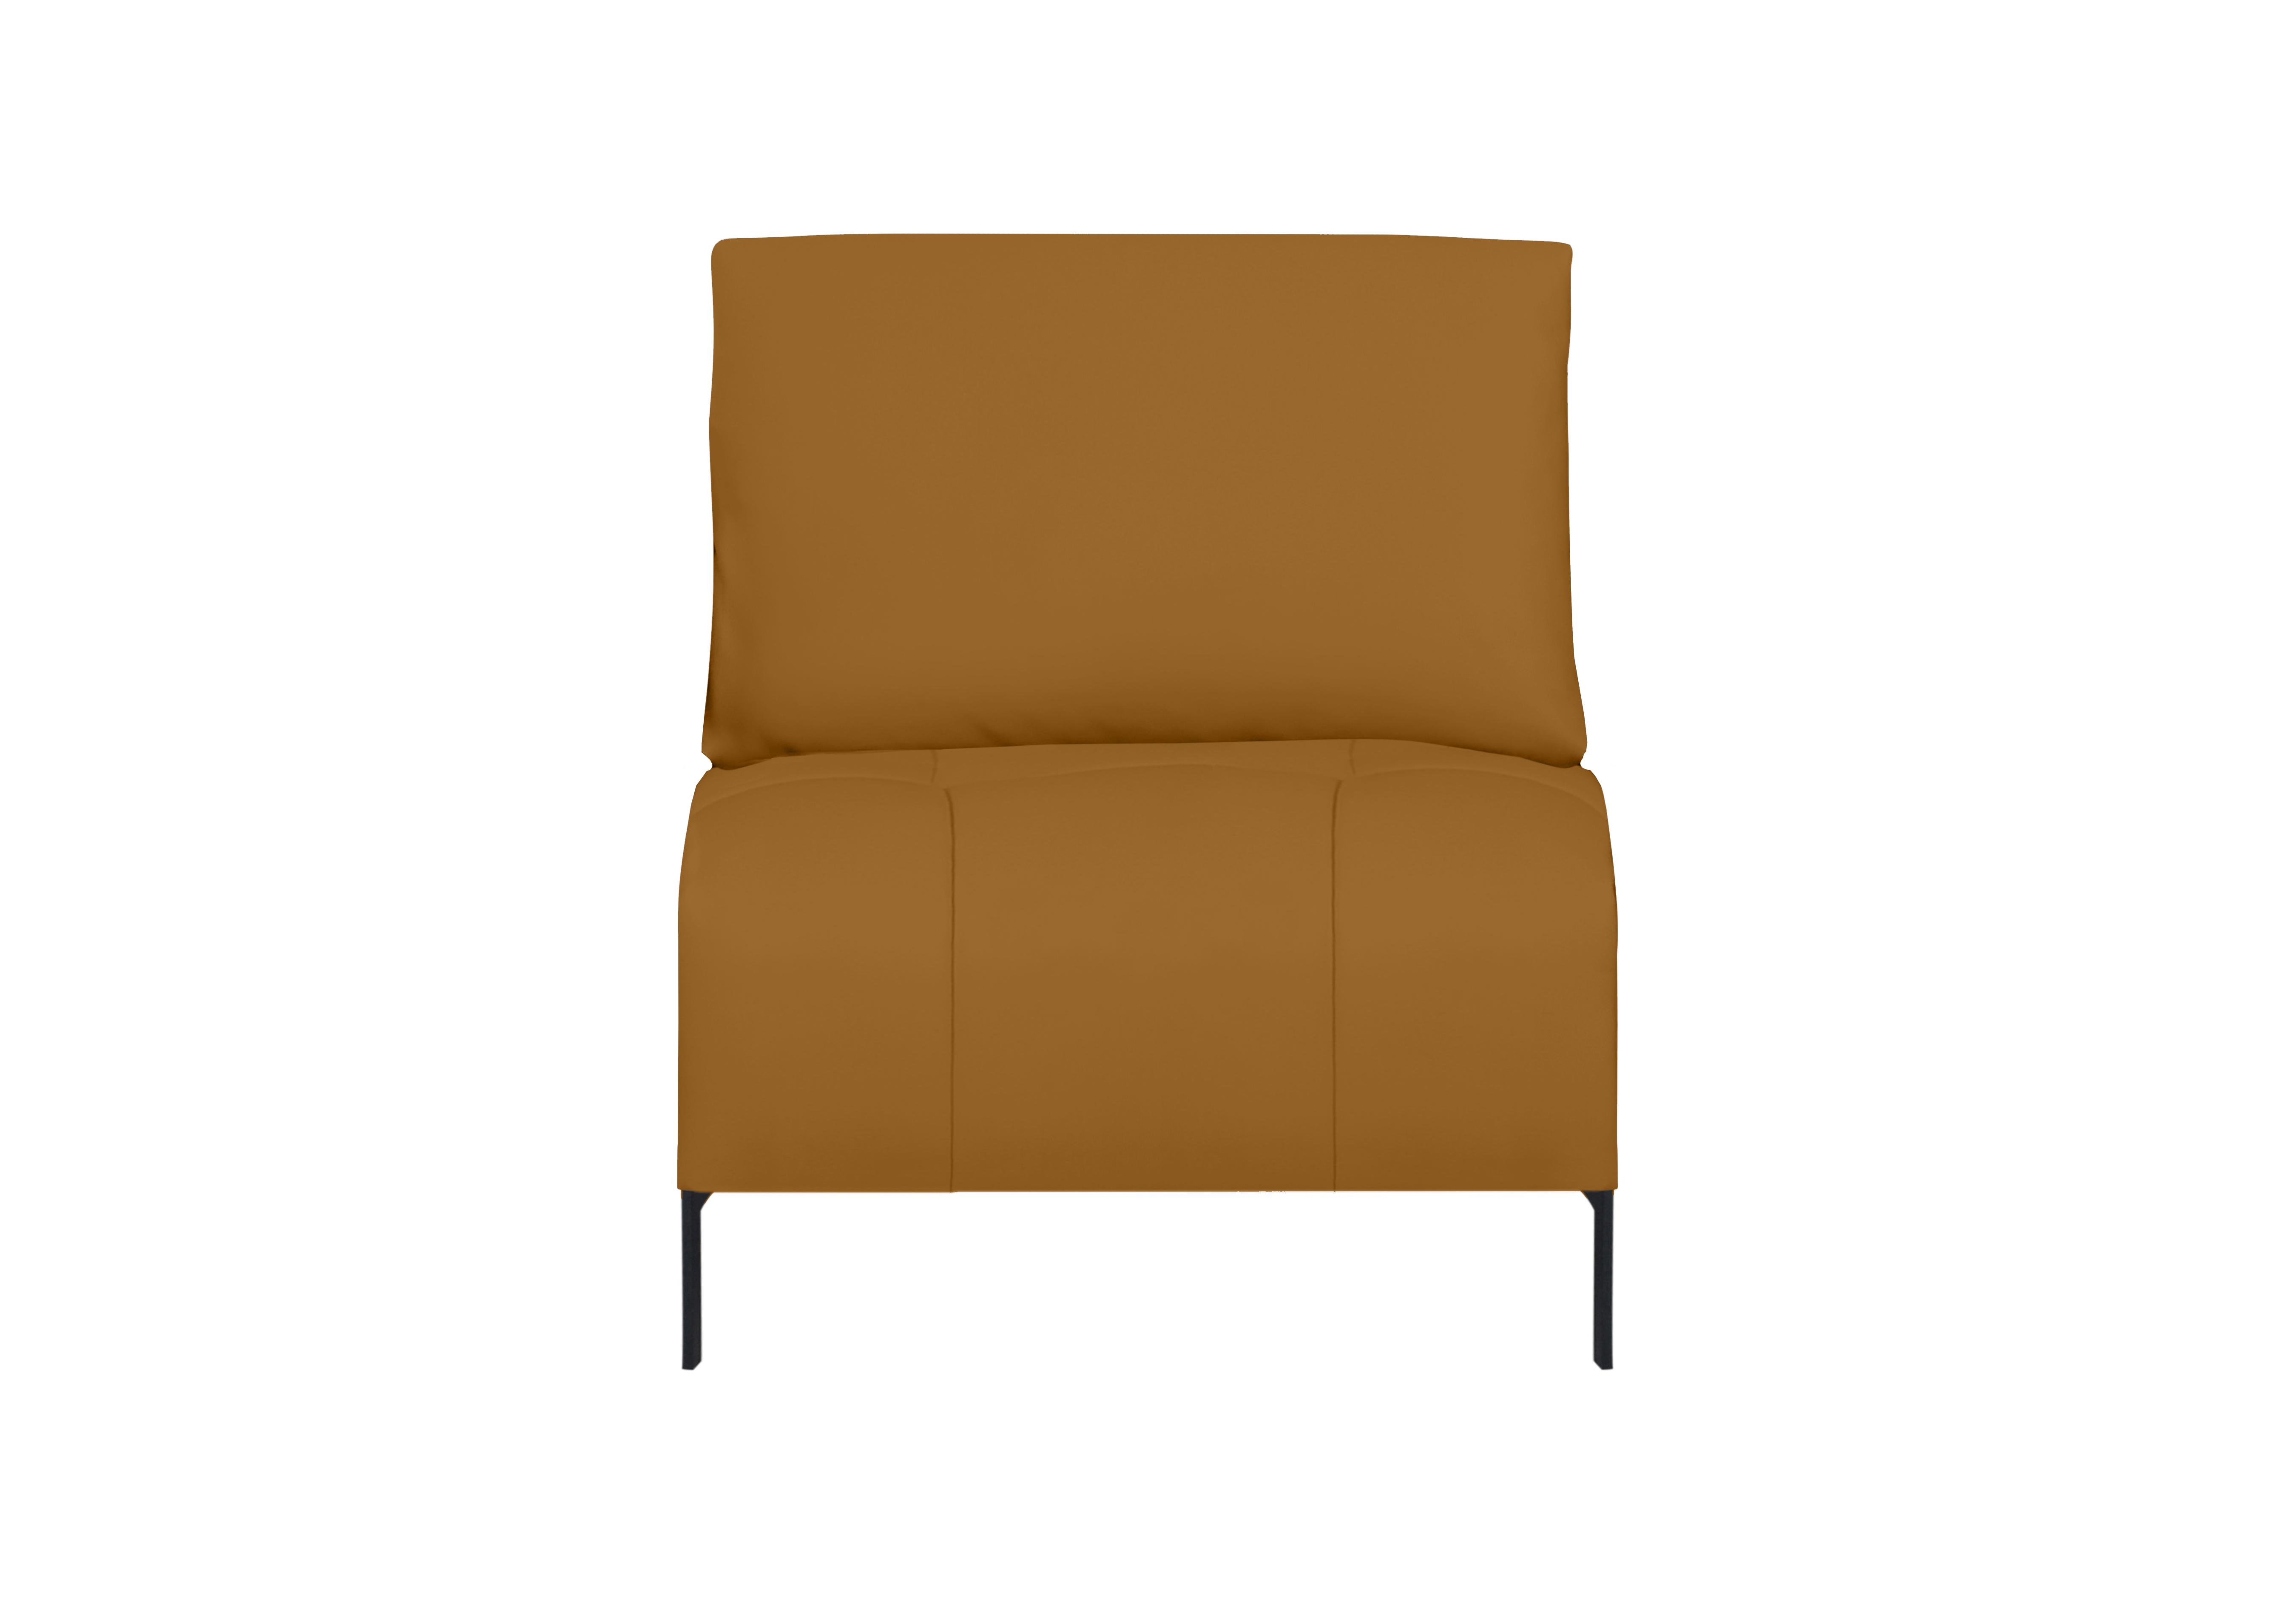 Lawson Leather 1.5 Seater Armless Unit in Np-606e Honey Yellow on Furniture Village